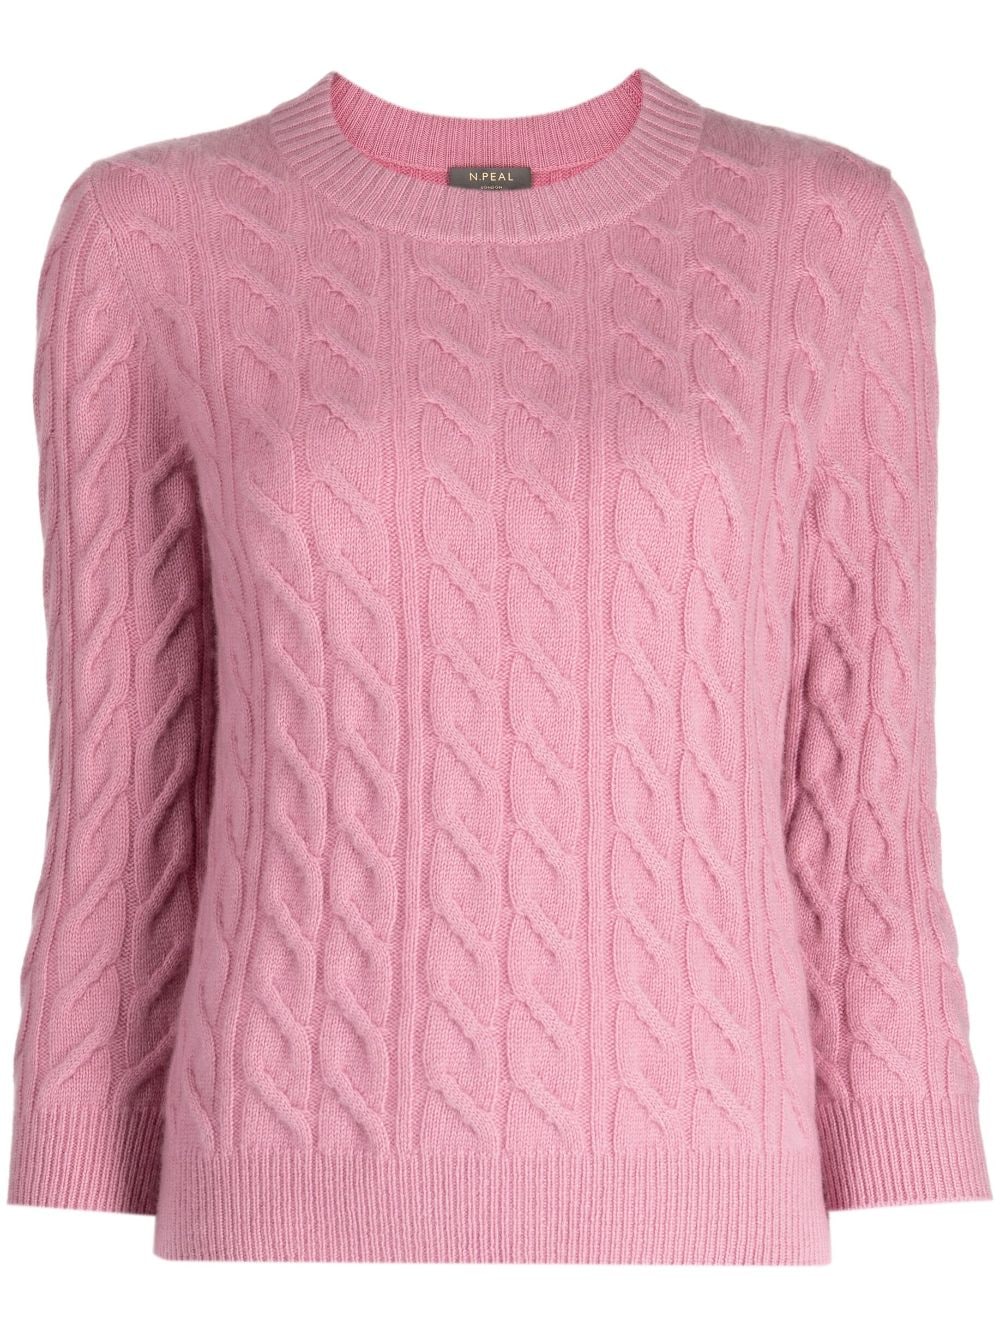 N•peal Cable-knit Cashmere Jumper In Pink